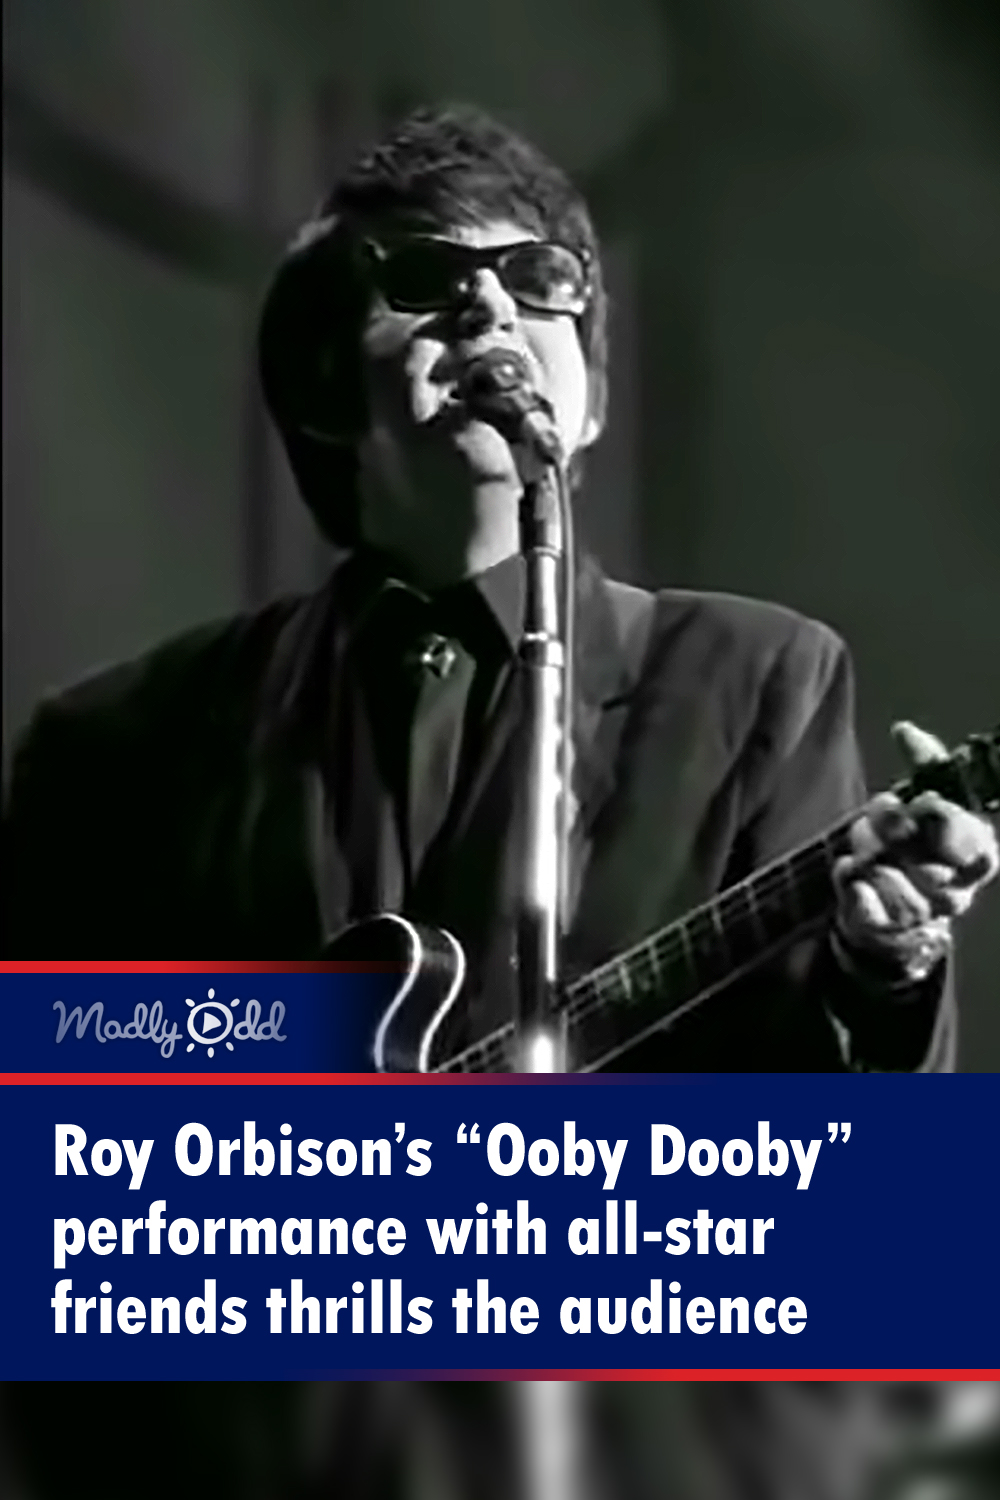 Roy Orbison’s “Ooby Dooby” performance with all-star friends thrills the audience